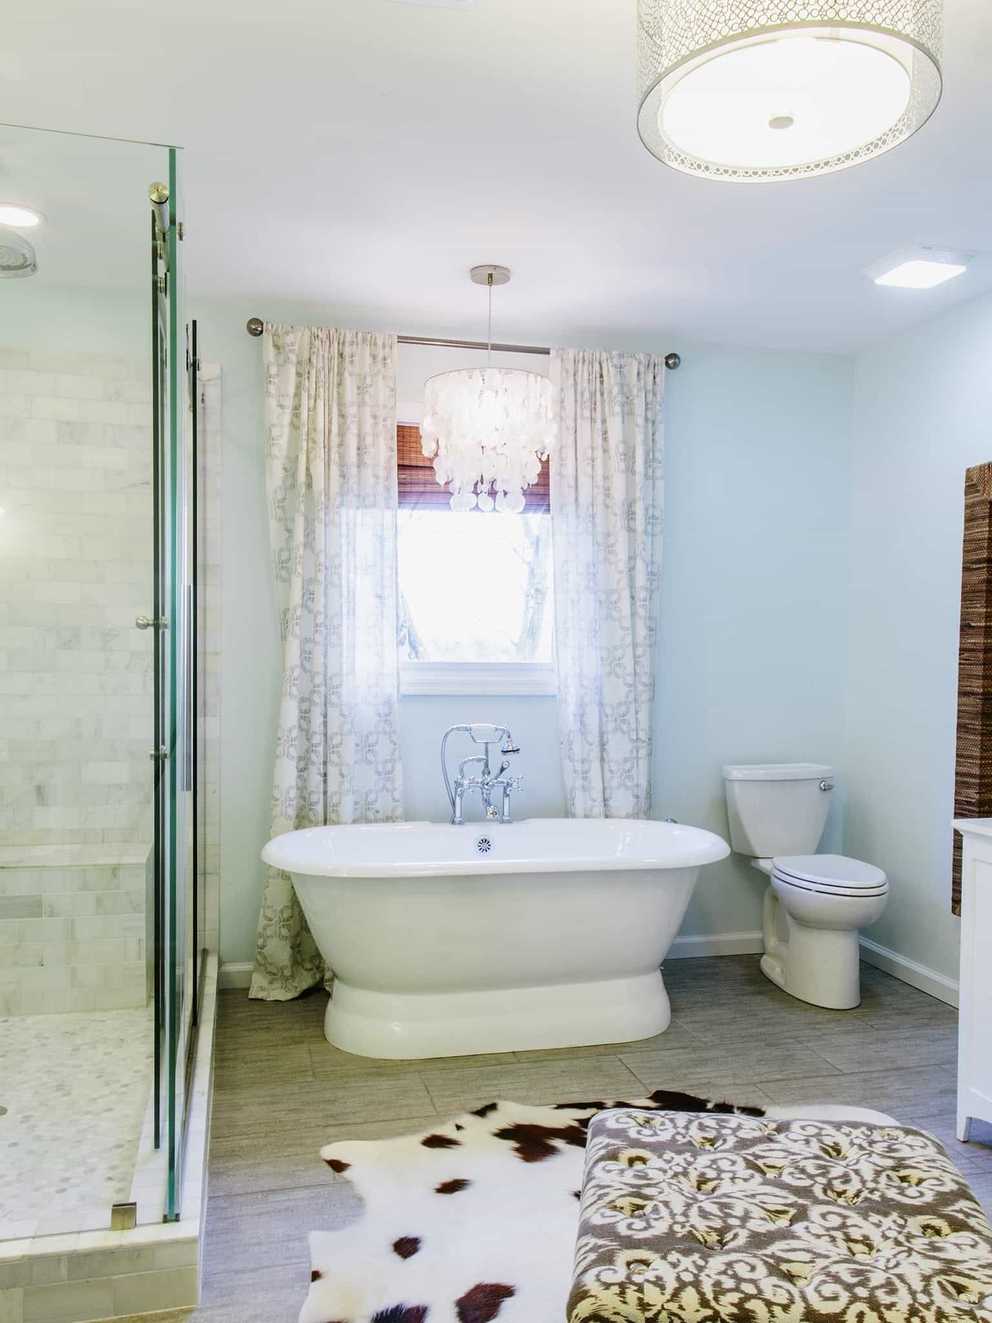 Cute Rug For Light Blue Bathroom With Freestanding Tub (Photo 7 of 11)